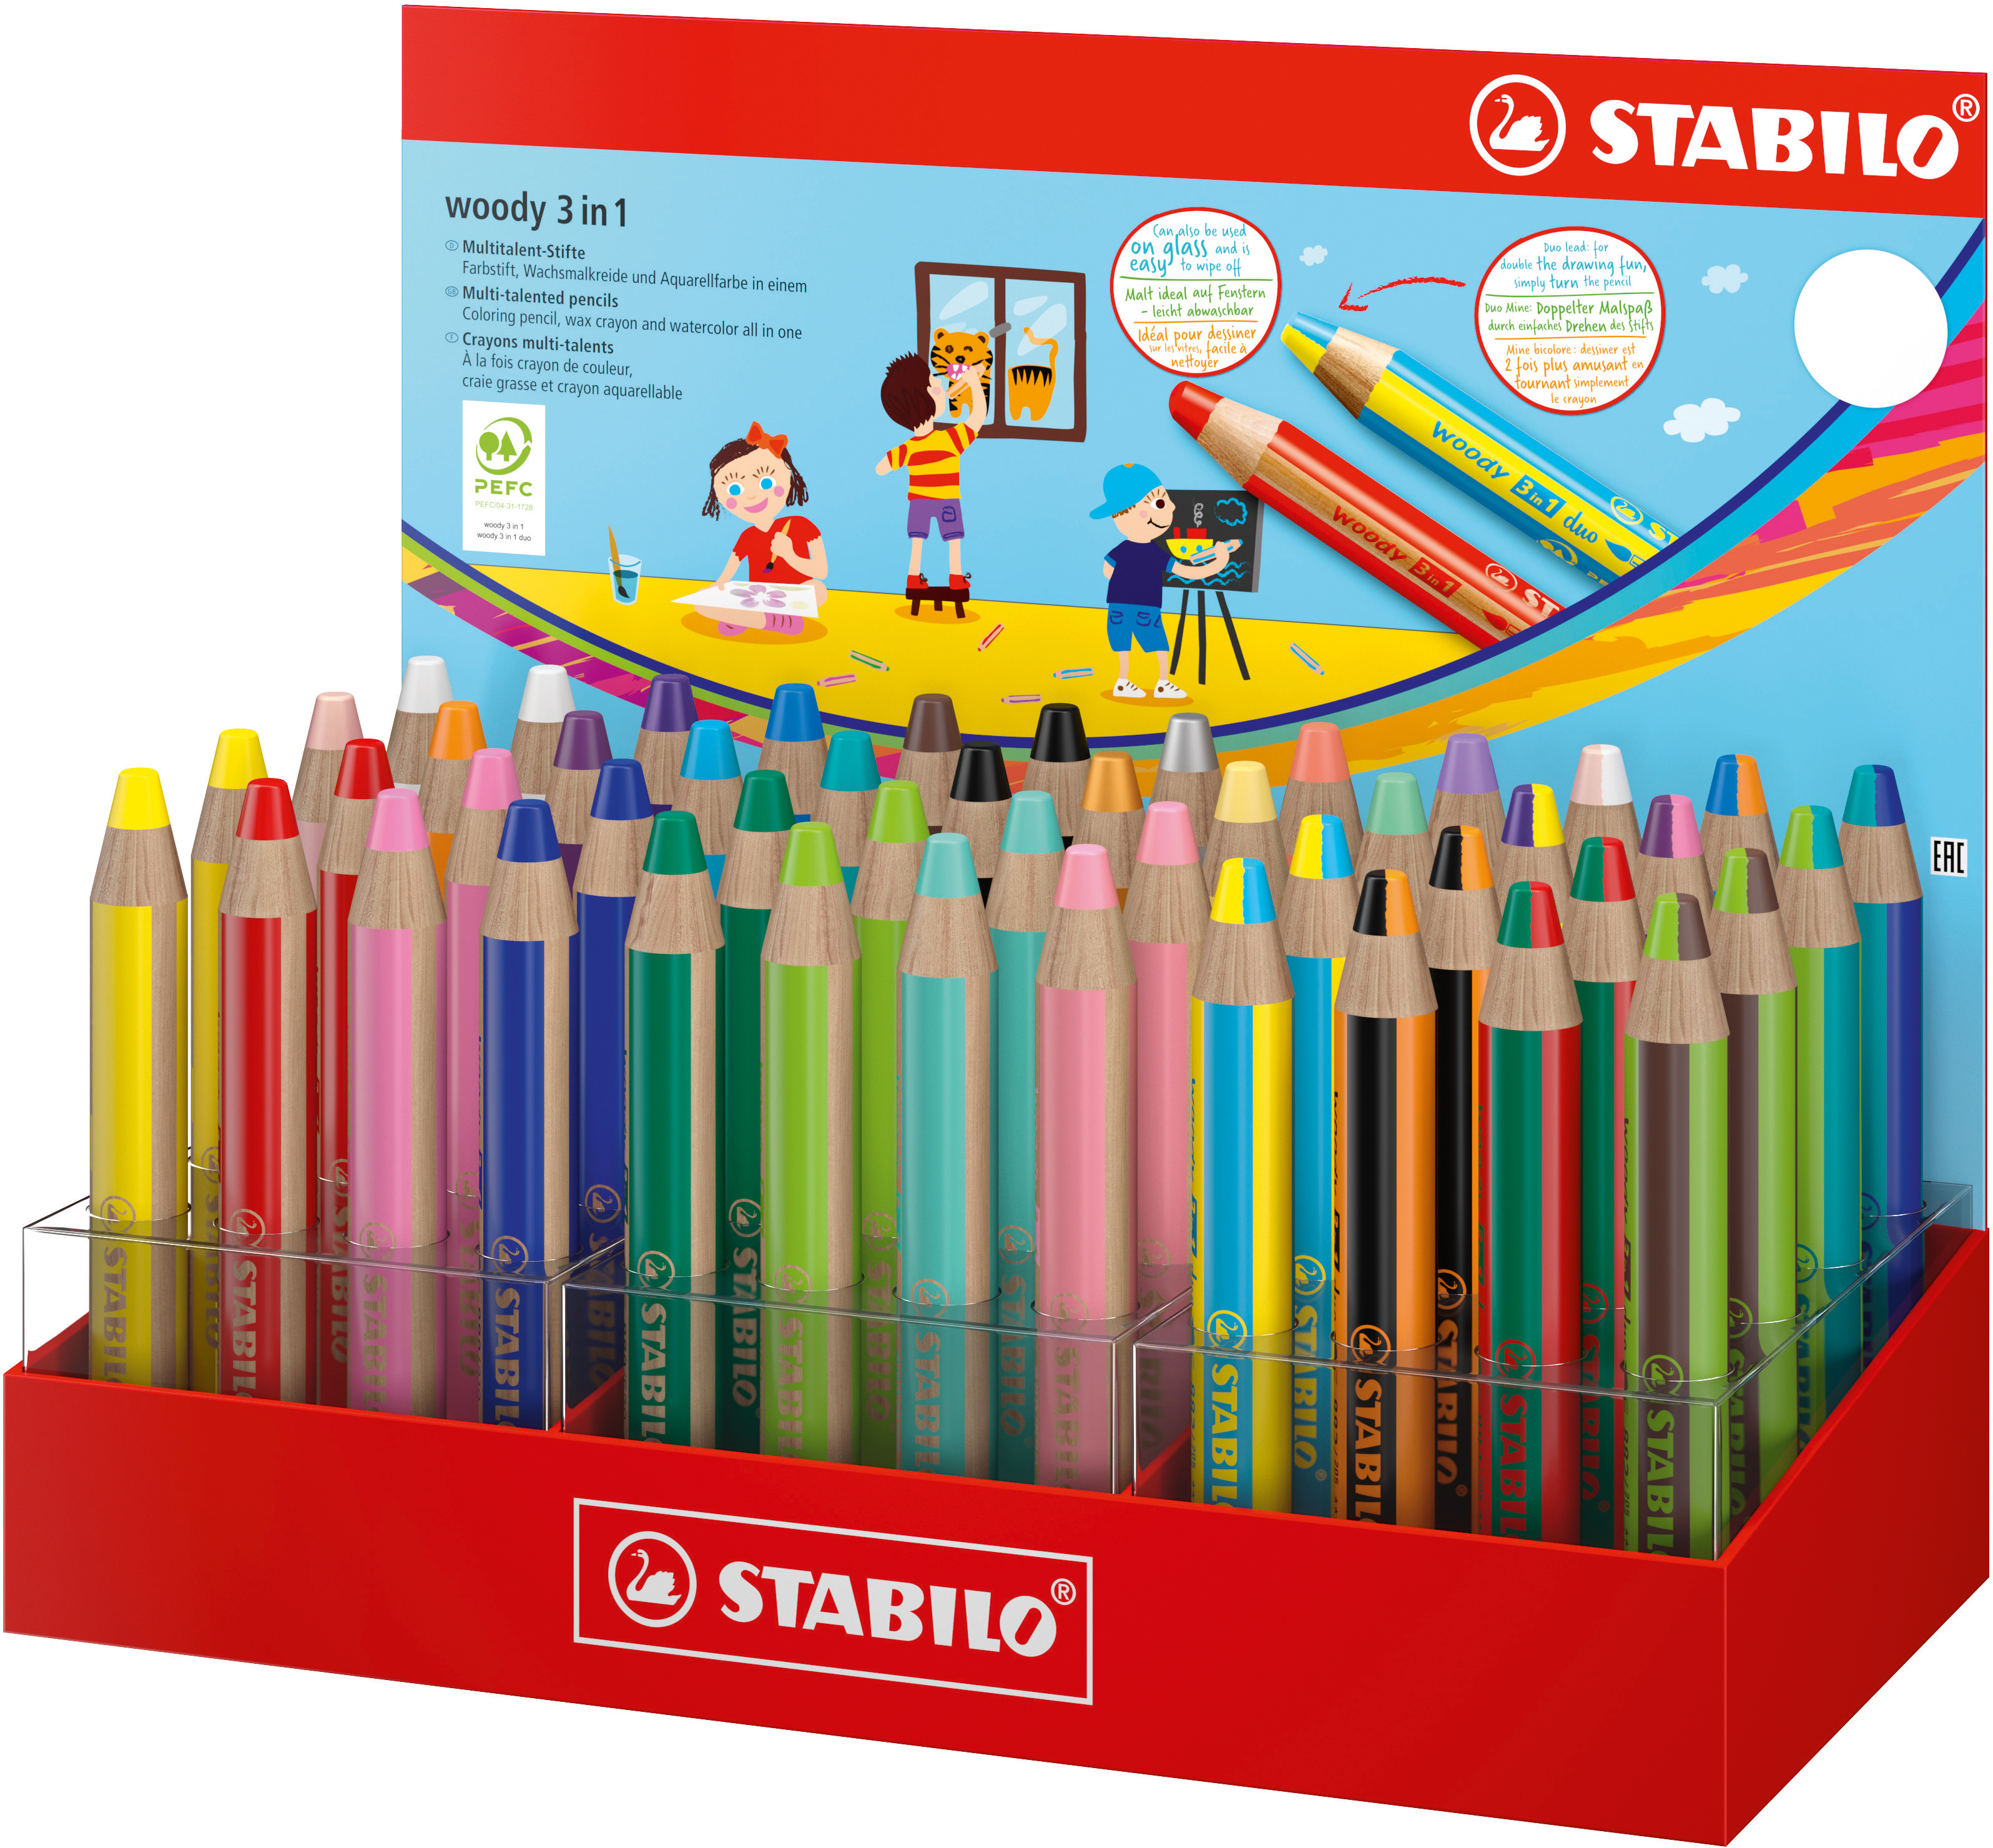 STABILO Crayon couleur Woody 3 in 1 880/48-5 Mix-Display 48 pcs.